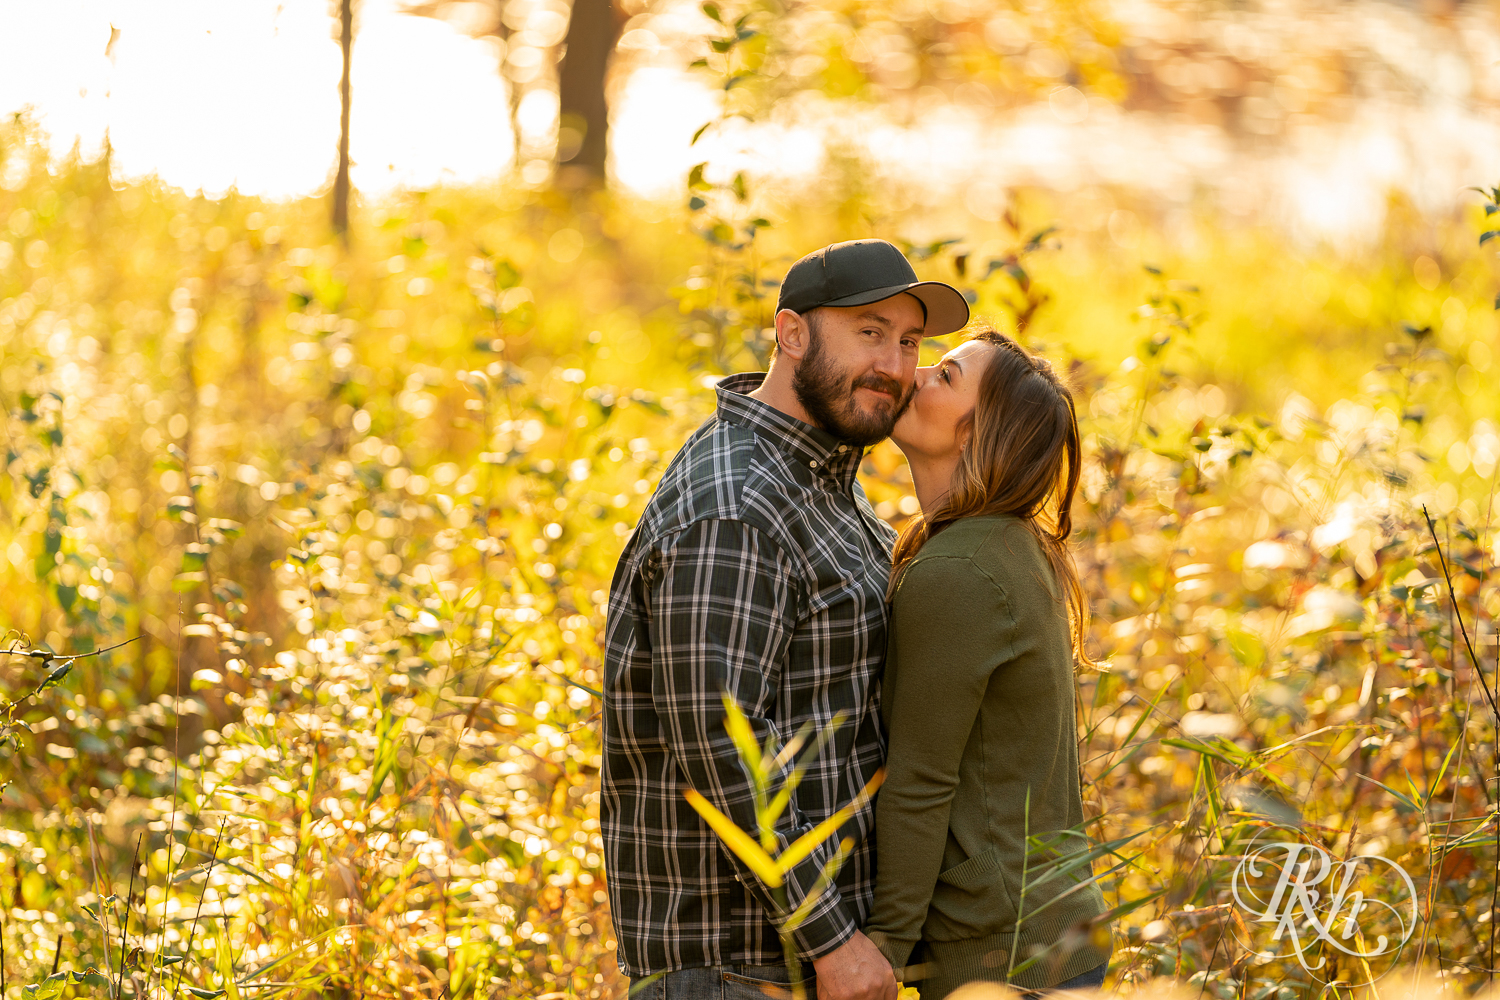 Man in flannel and woman in jeans and sweater kissing in field during sunset in Eagan, Minnesota.